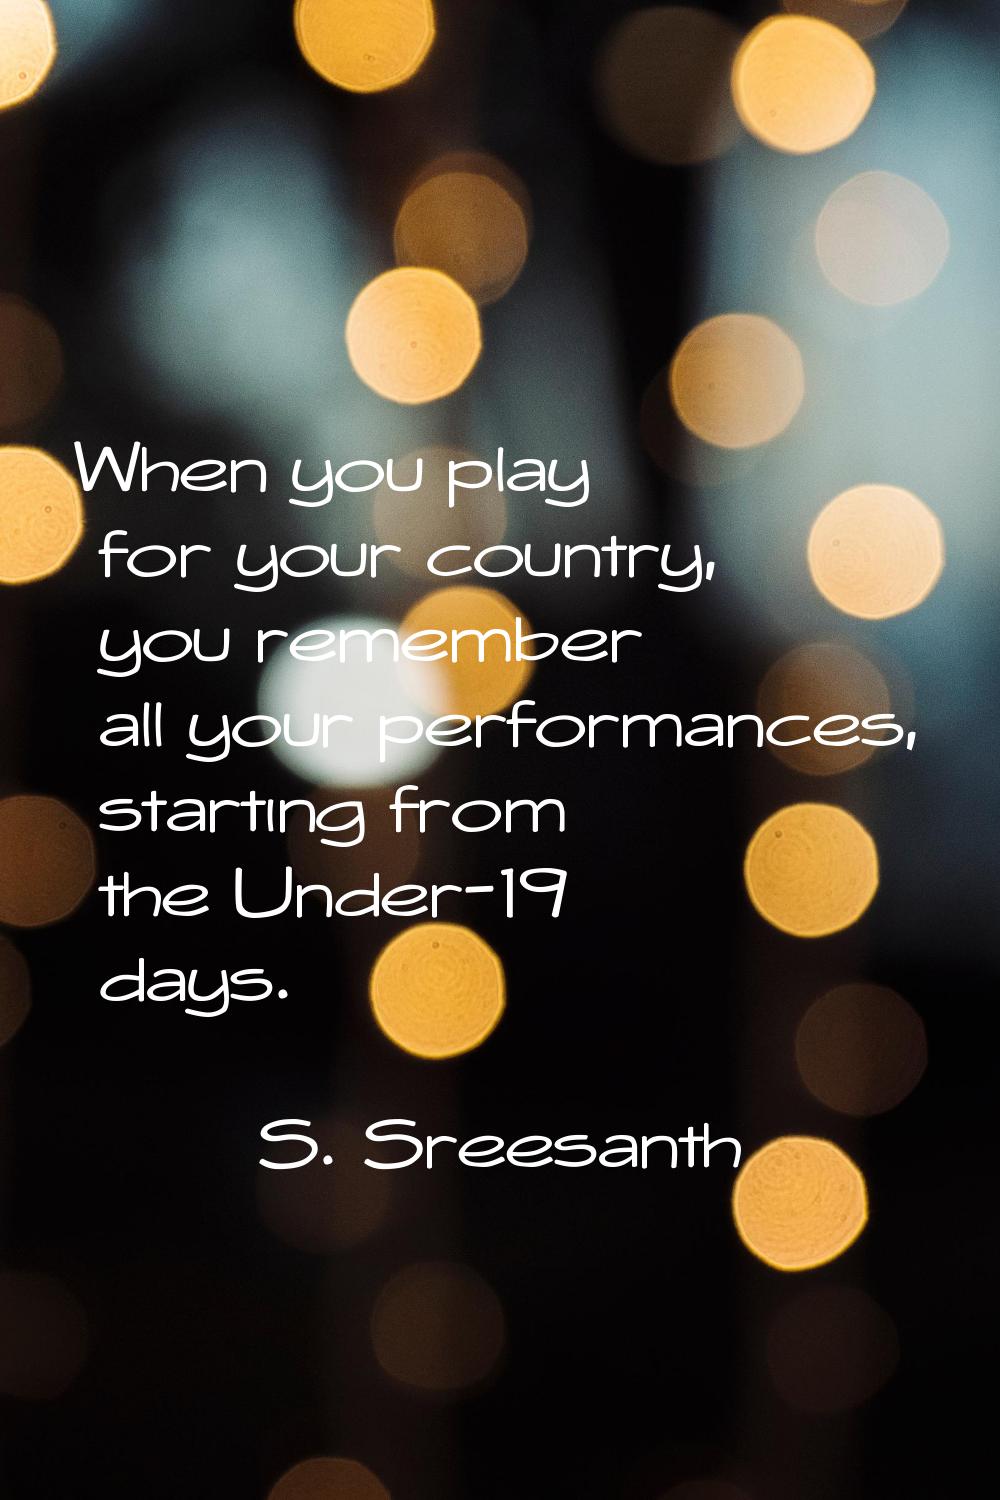 When you play for your country, you remember all your performances, starting from the Under-19 days